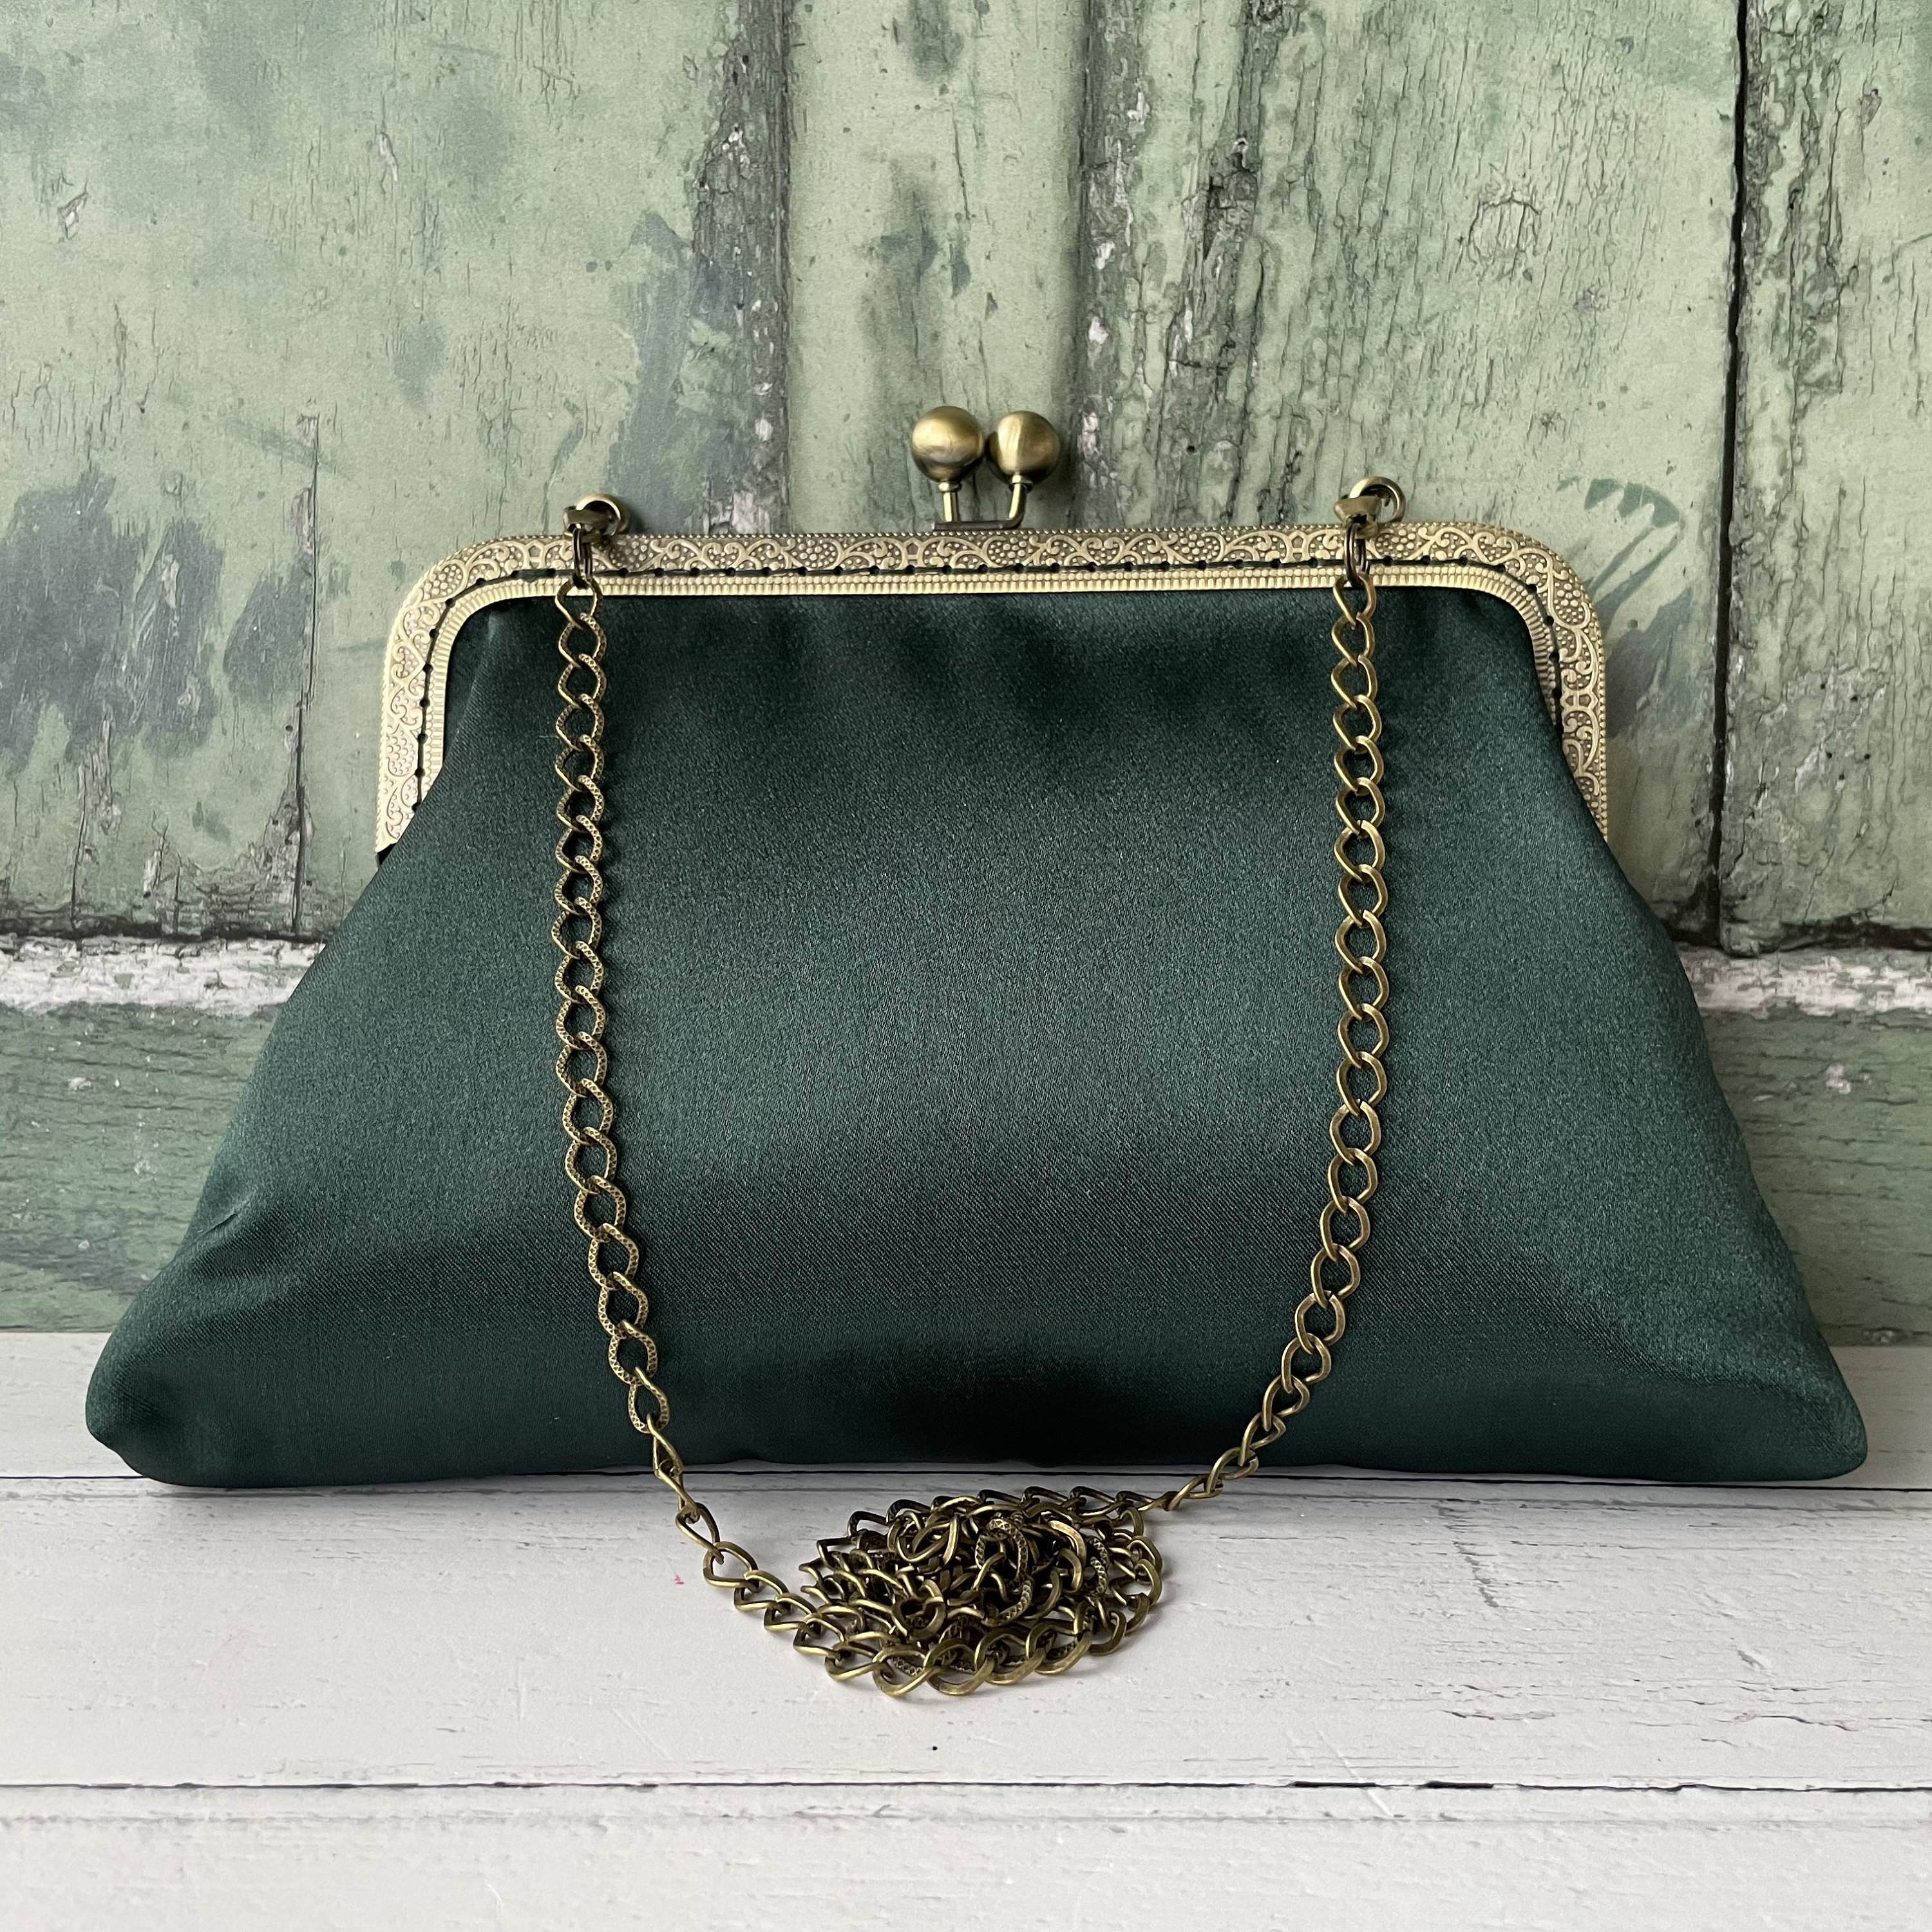 Sac Bag Oil Wax Green Leather Handbags Purse Luxury Women Color Womens  Pocket Messenger Big Bols Lady Tote Bags Hand Vrrvk From Luxurybags07,  $57.09 | DHgate.Com